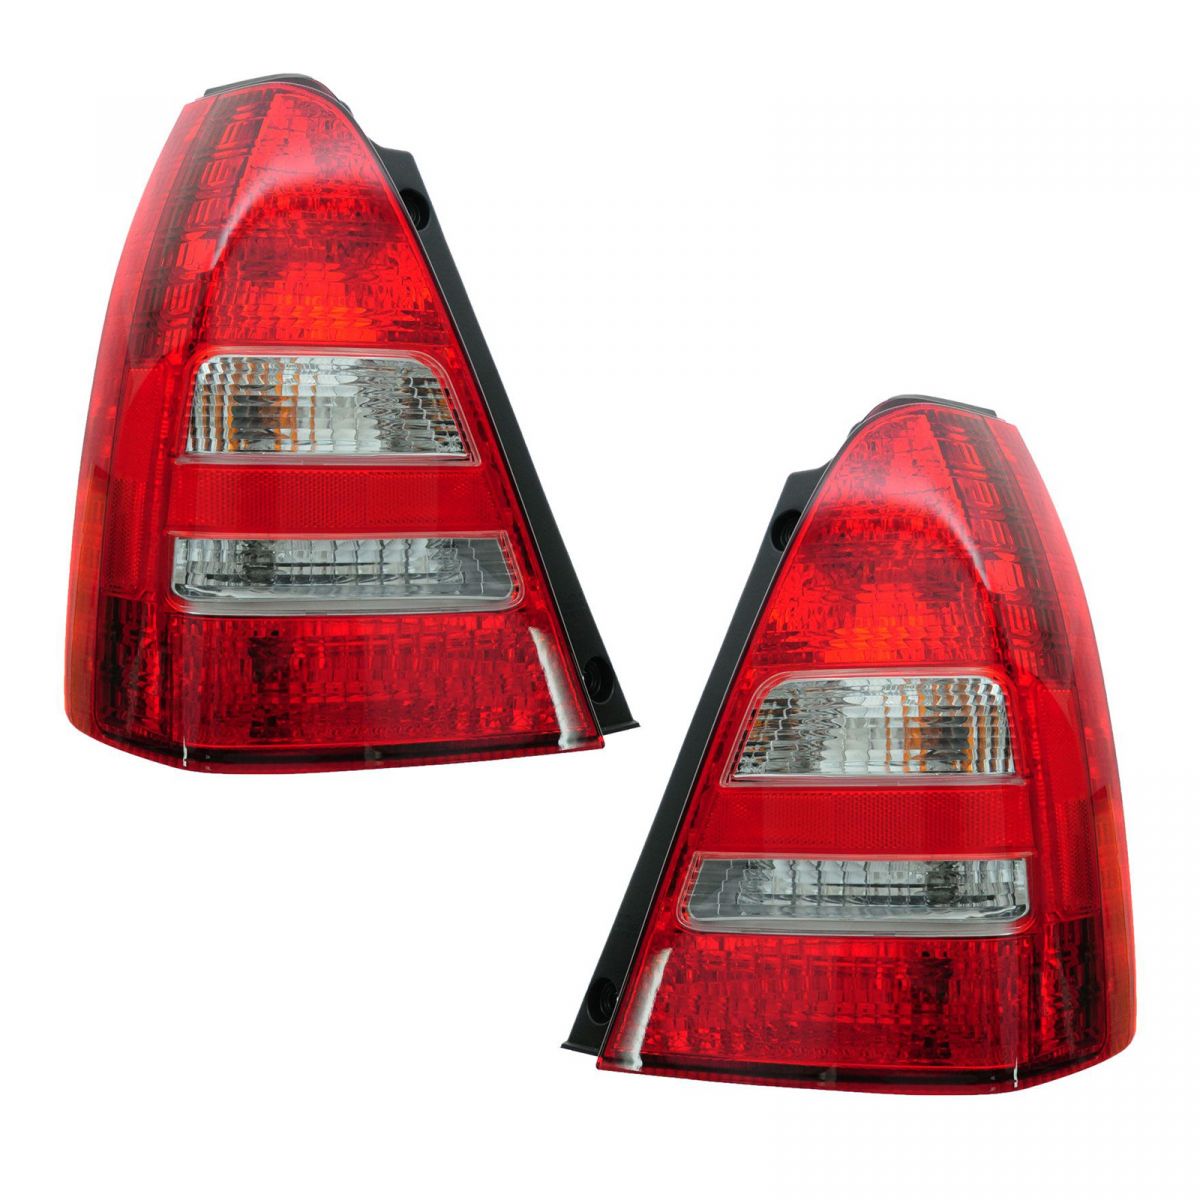 2003 Subaru Forester Tail Light Bulb Replacement